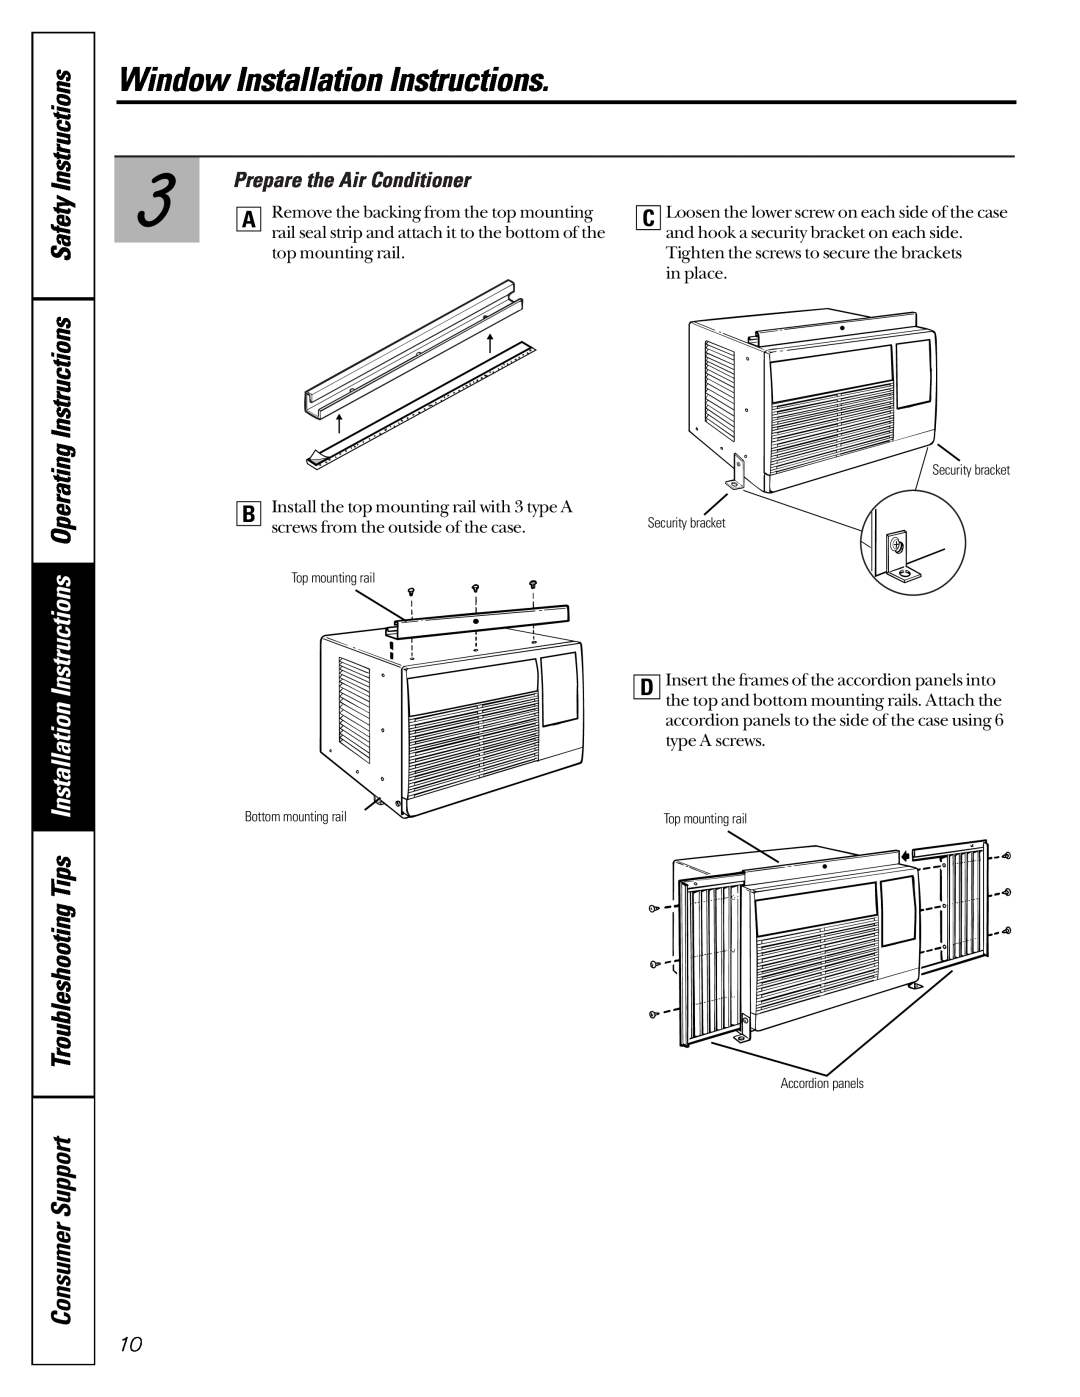 GE ASP05, AST06 Instructions Safety Instructions, Consumer Support Troubleshooting Tips, Prepare the Air Conditioner 